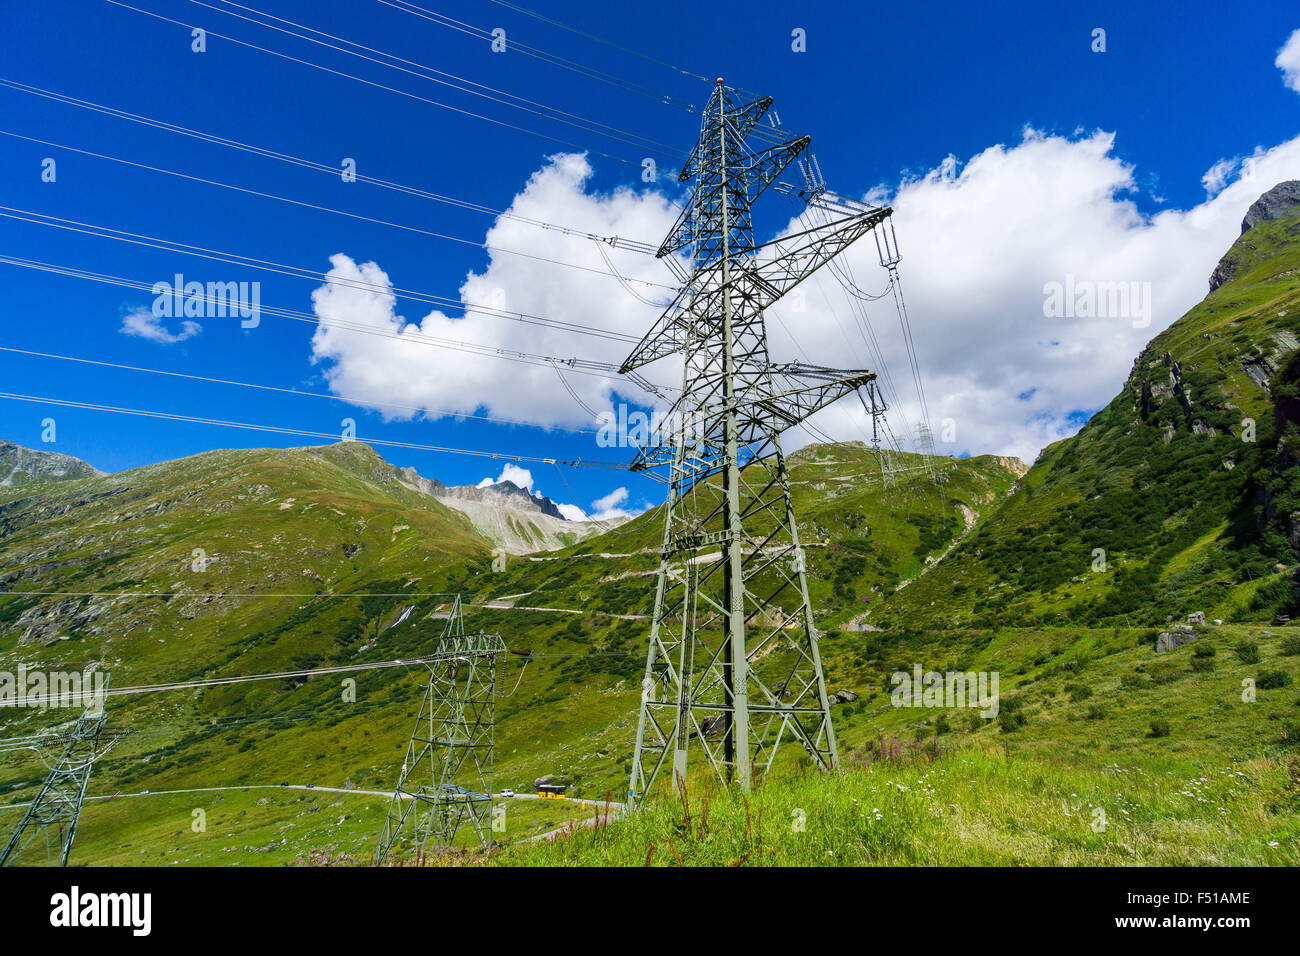 An electricity line is crossing green mountains slopes in high altitude Stock Photo